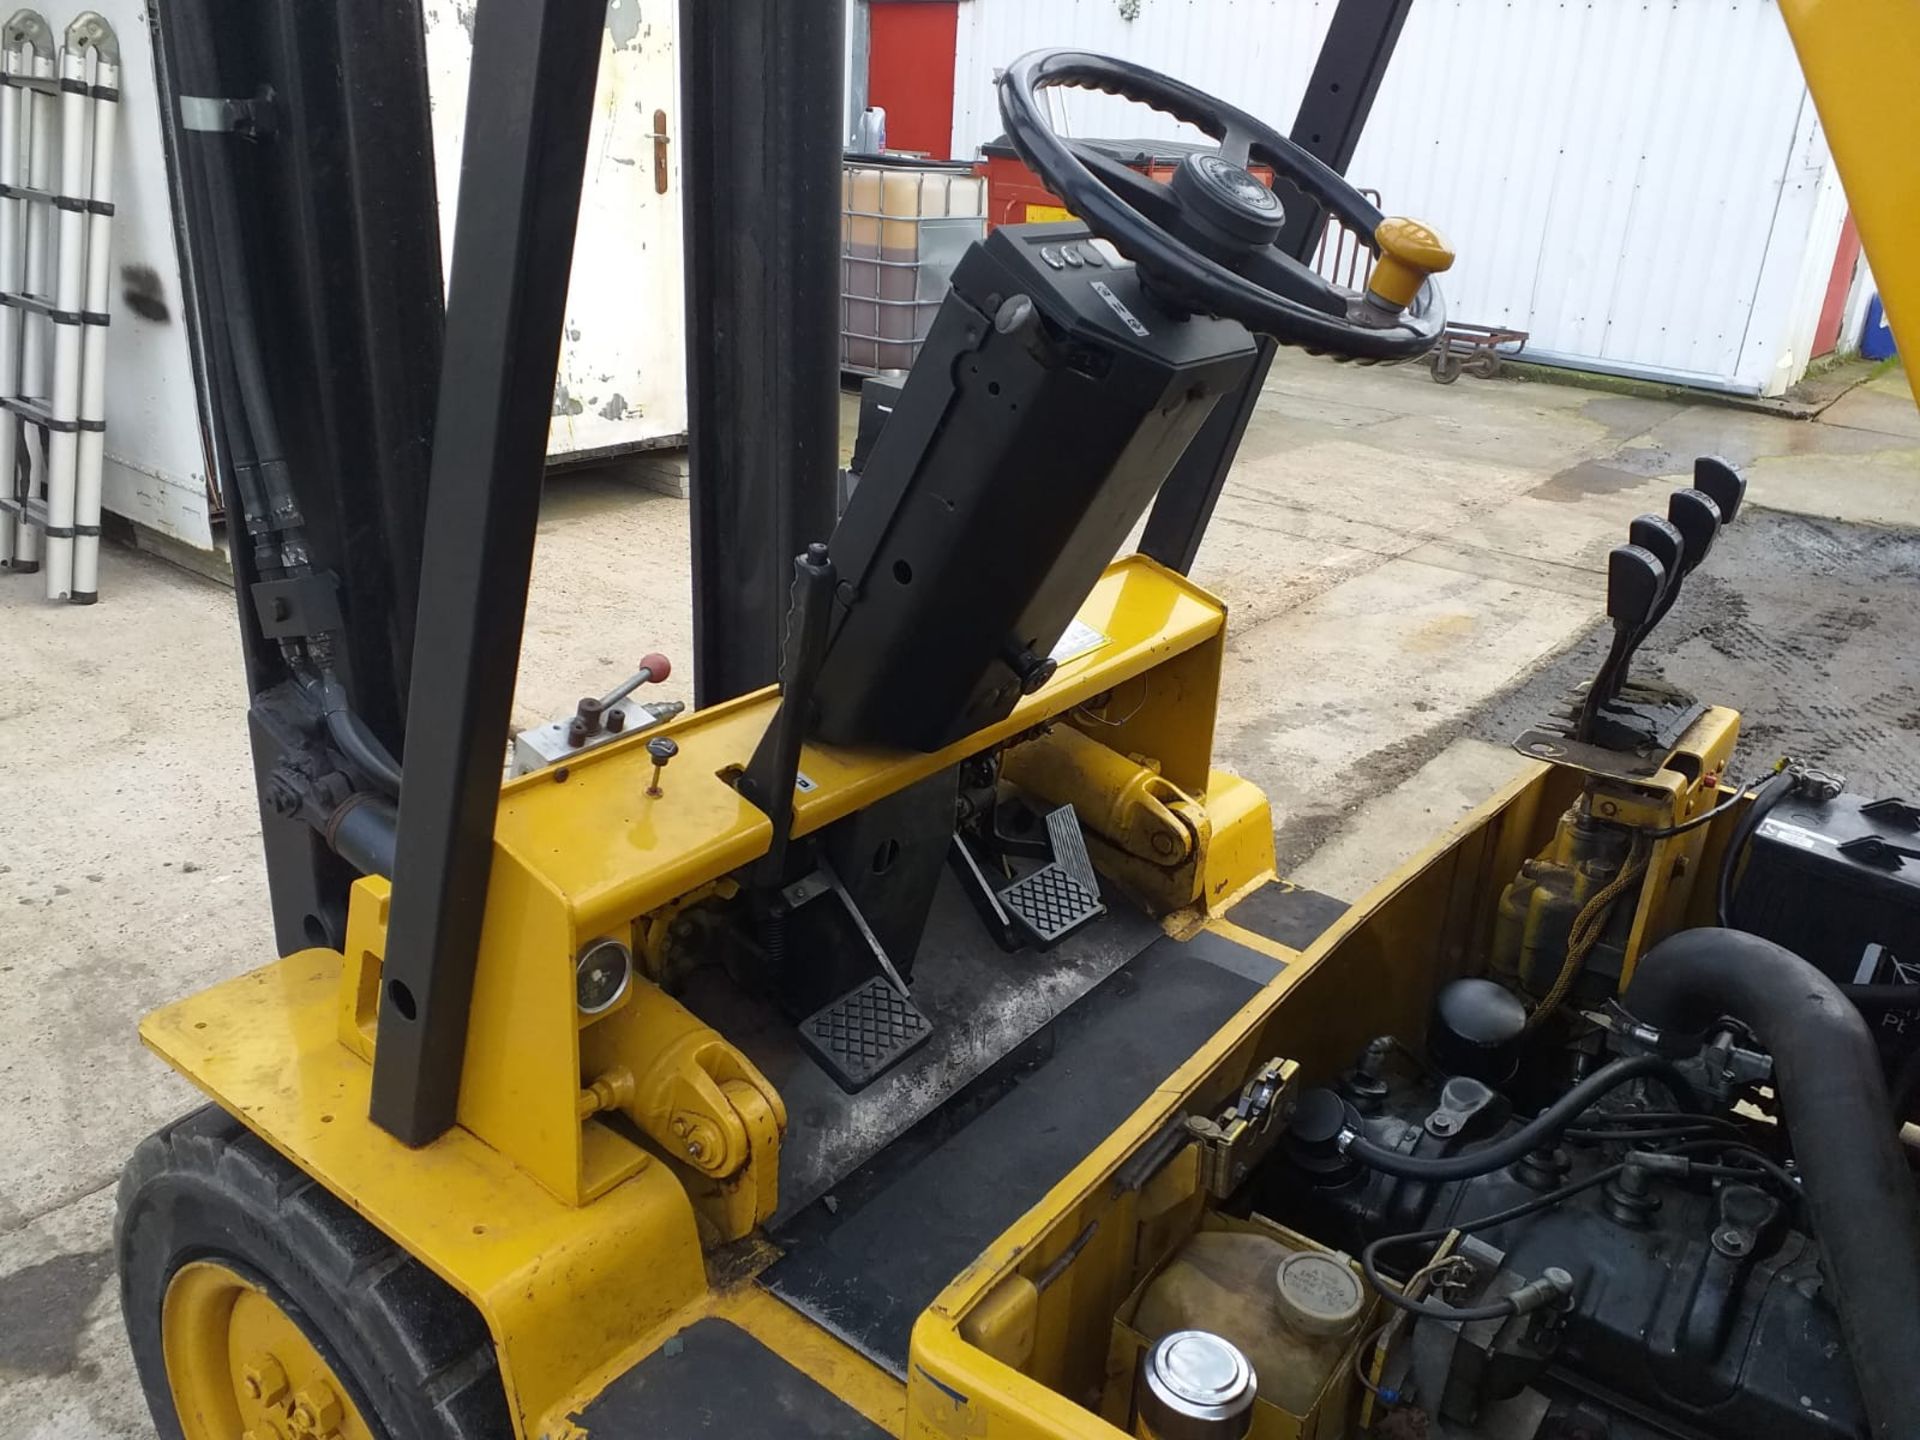 CATERPILLAR V40D GAS FORKLIFT, CAPACITY 2000 KG, LIFT HEIGHT 4000 MM, 12,511 HOURS, RUNS & WORKS - Image 9 of 14